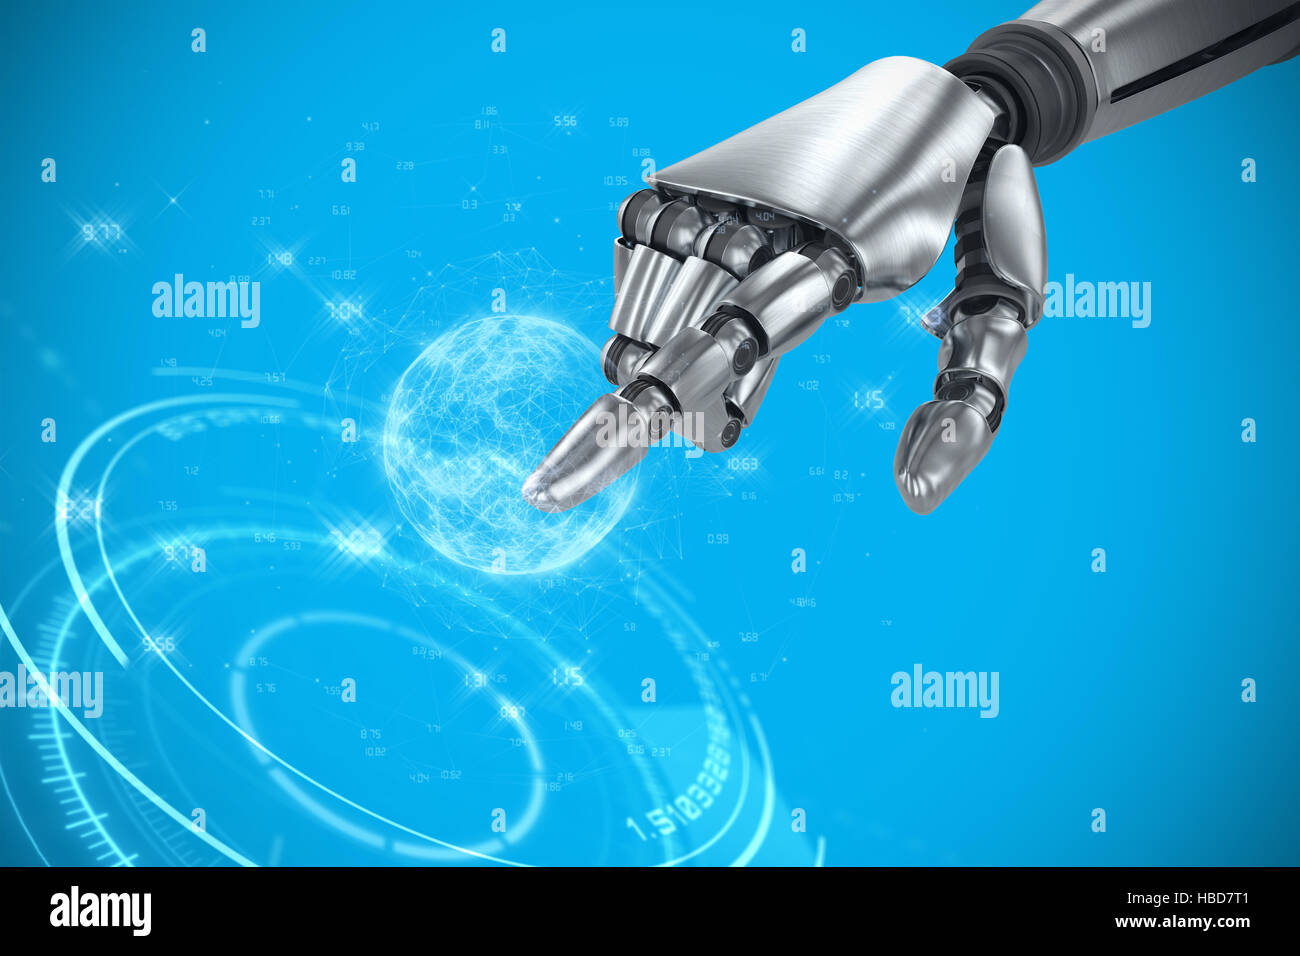 Composite image of silver robot arm pointing at something Stock Photo